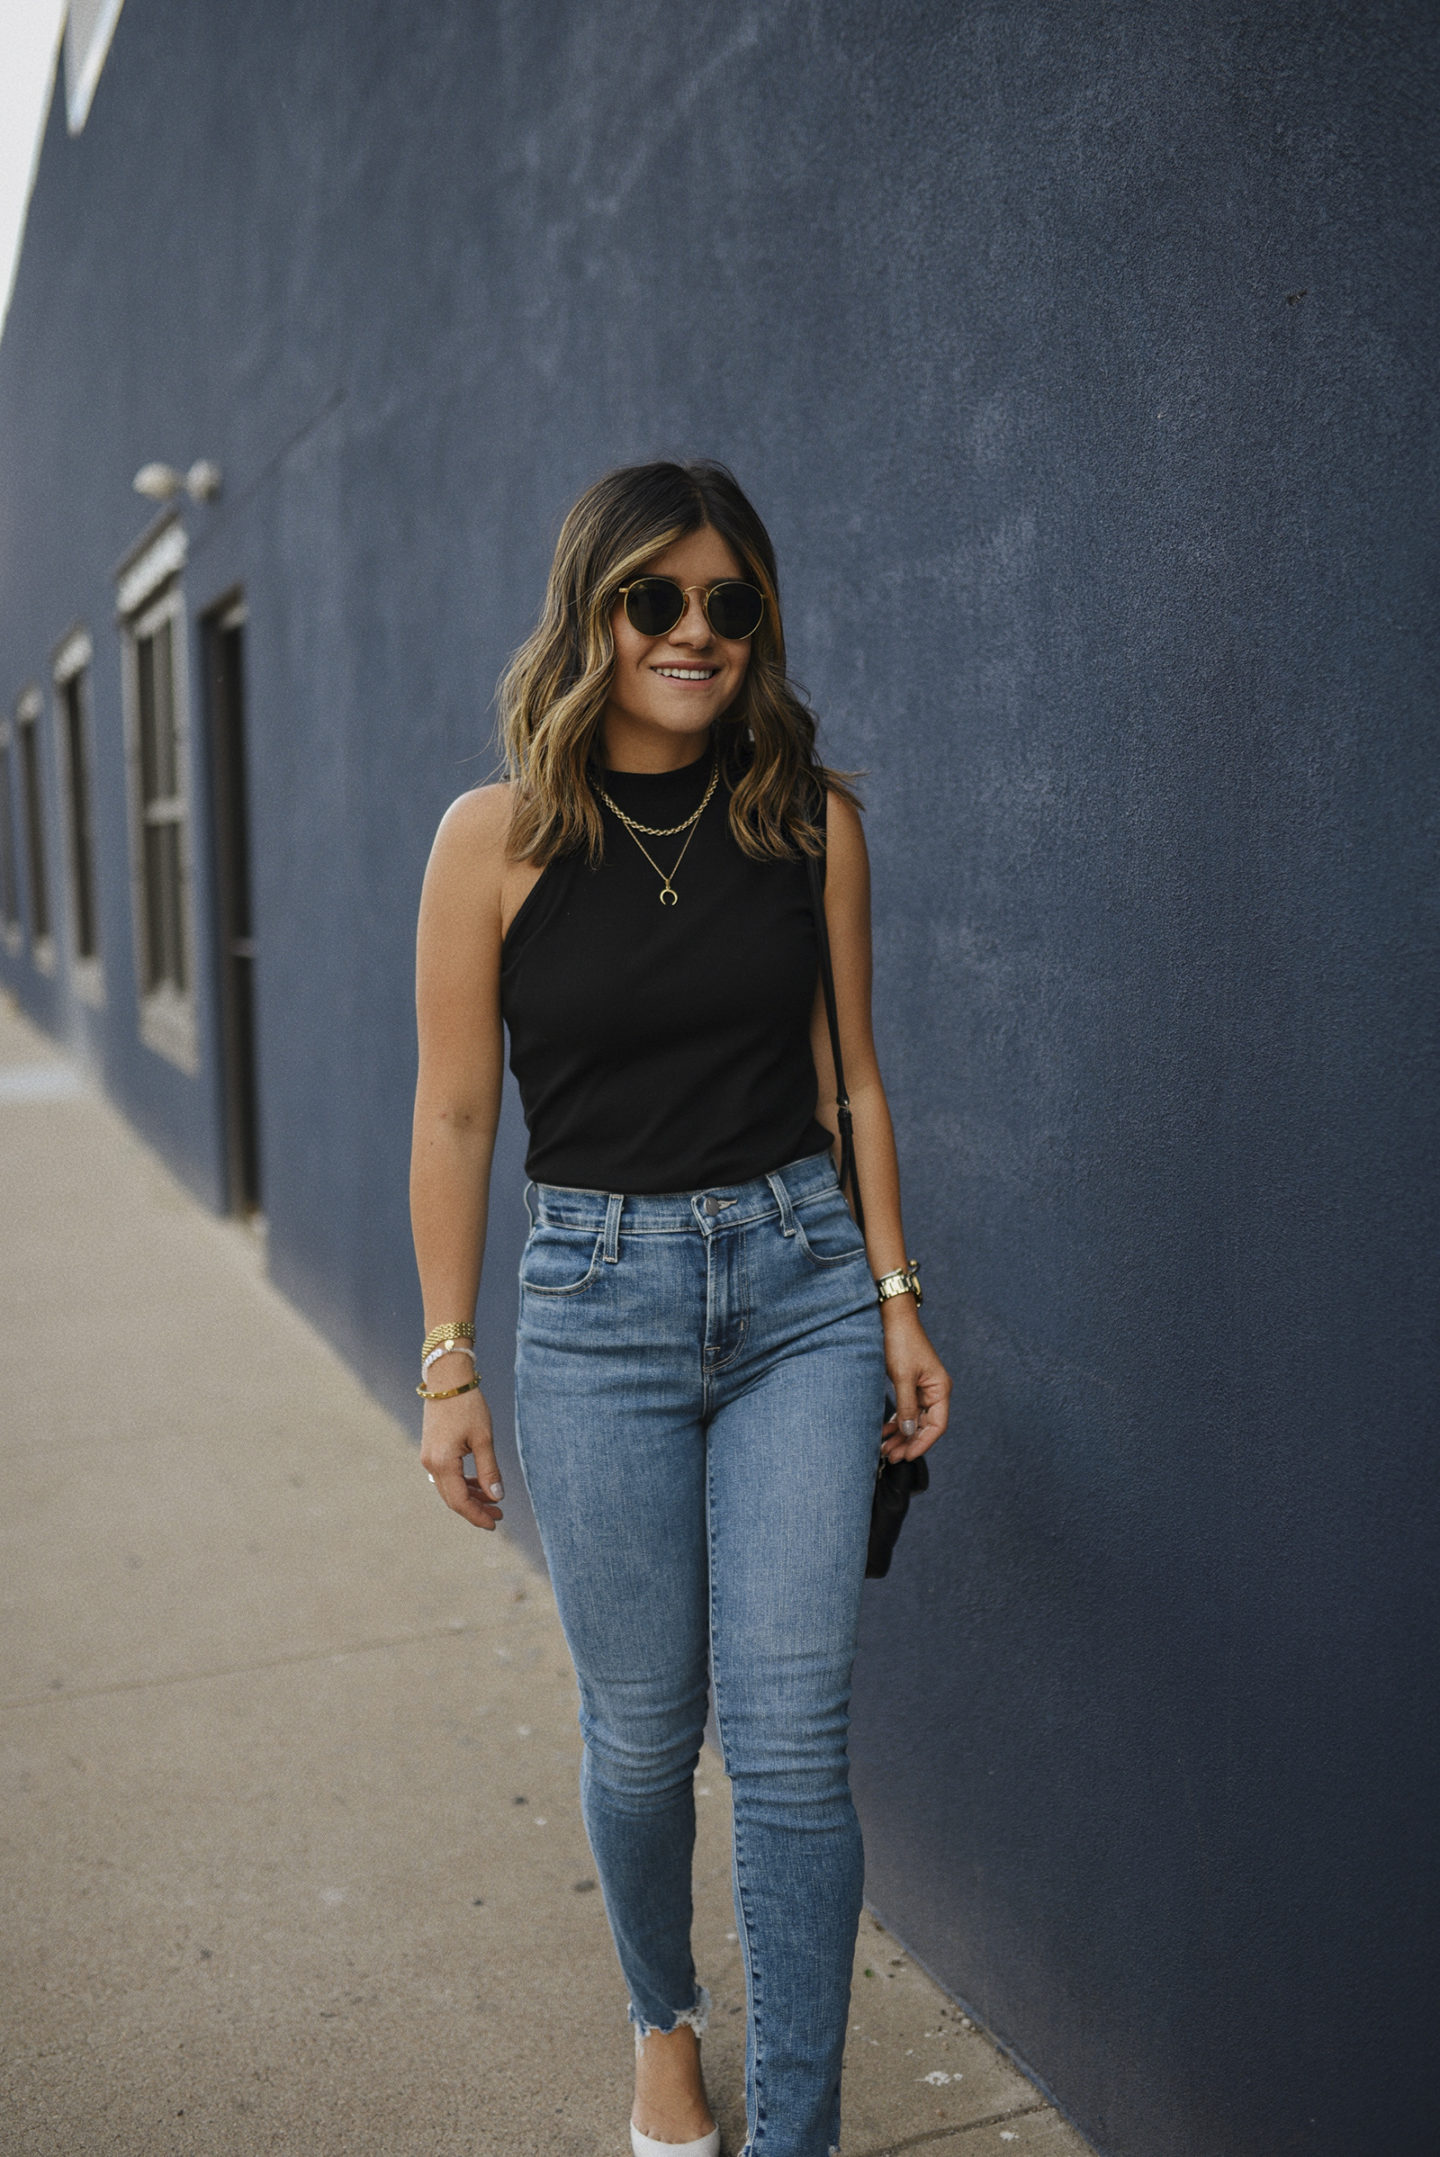 THE SKINNY JEANS I CAN’T STOP WEARING | CHIC TALK | CHIC TALK